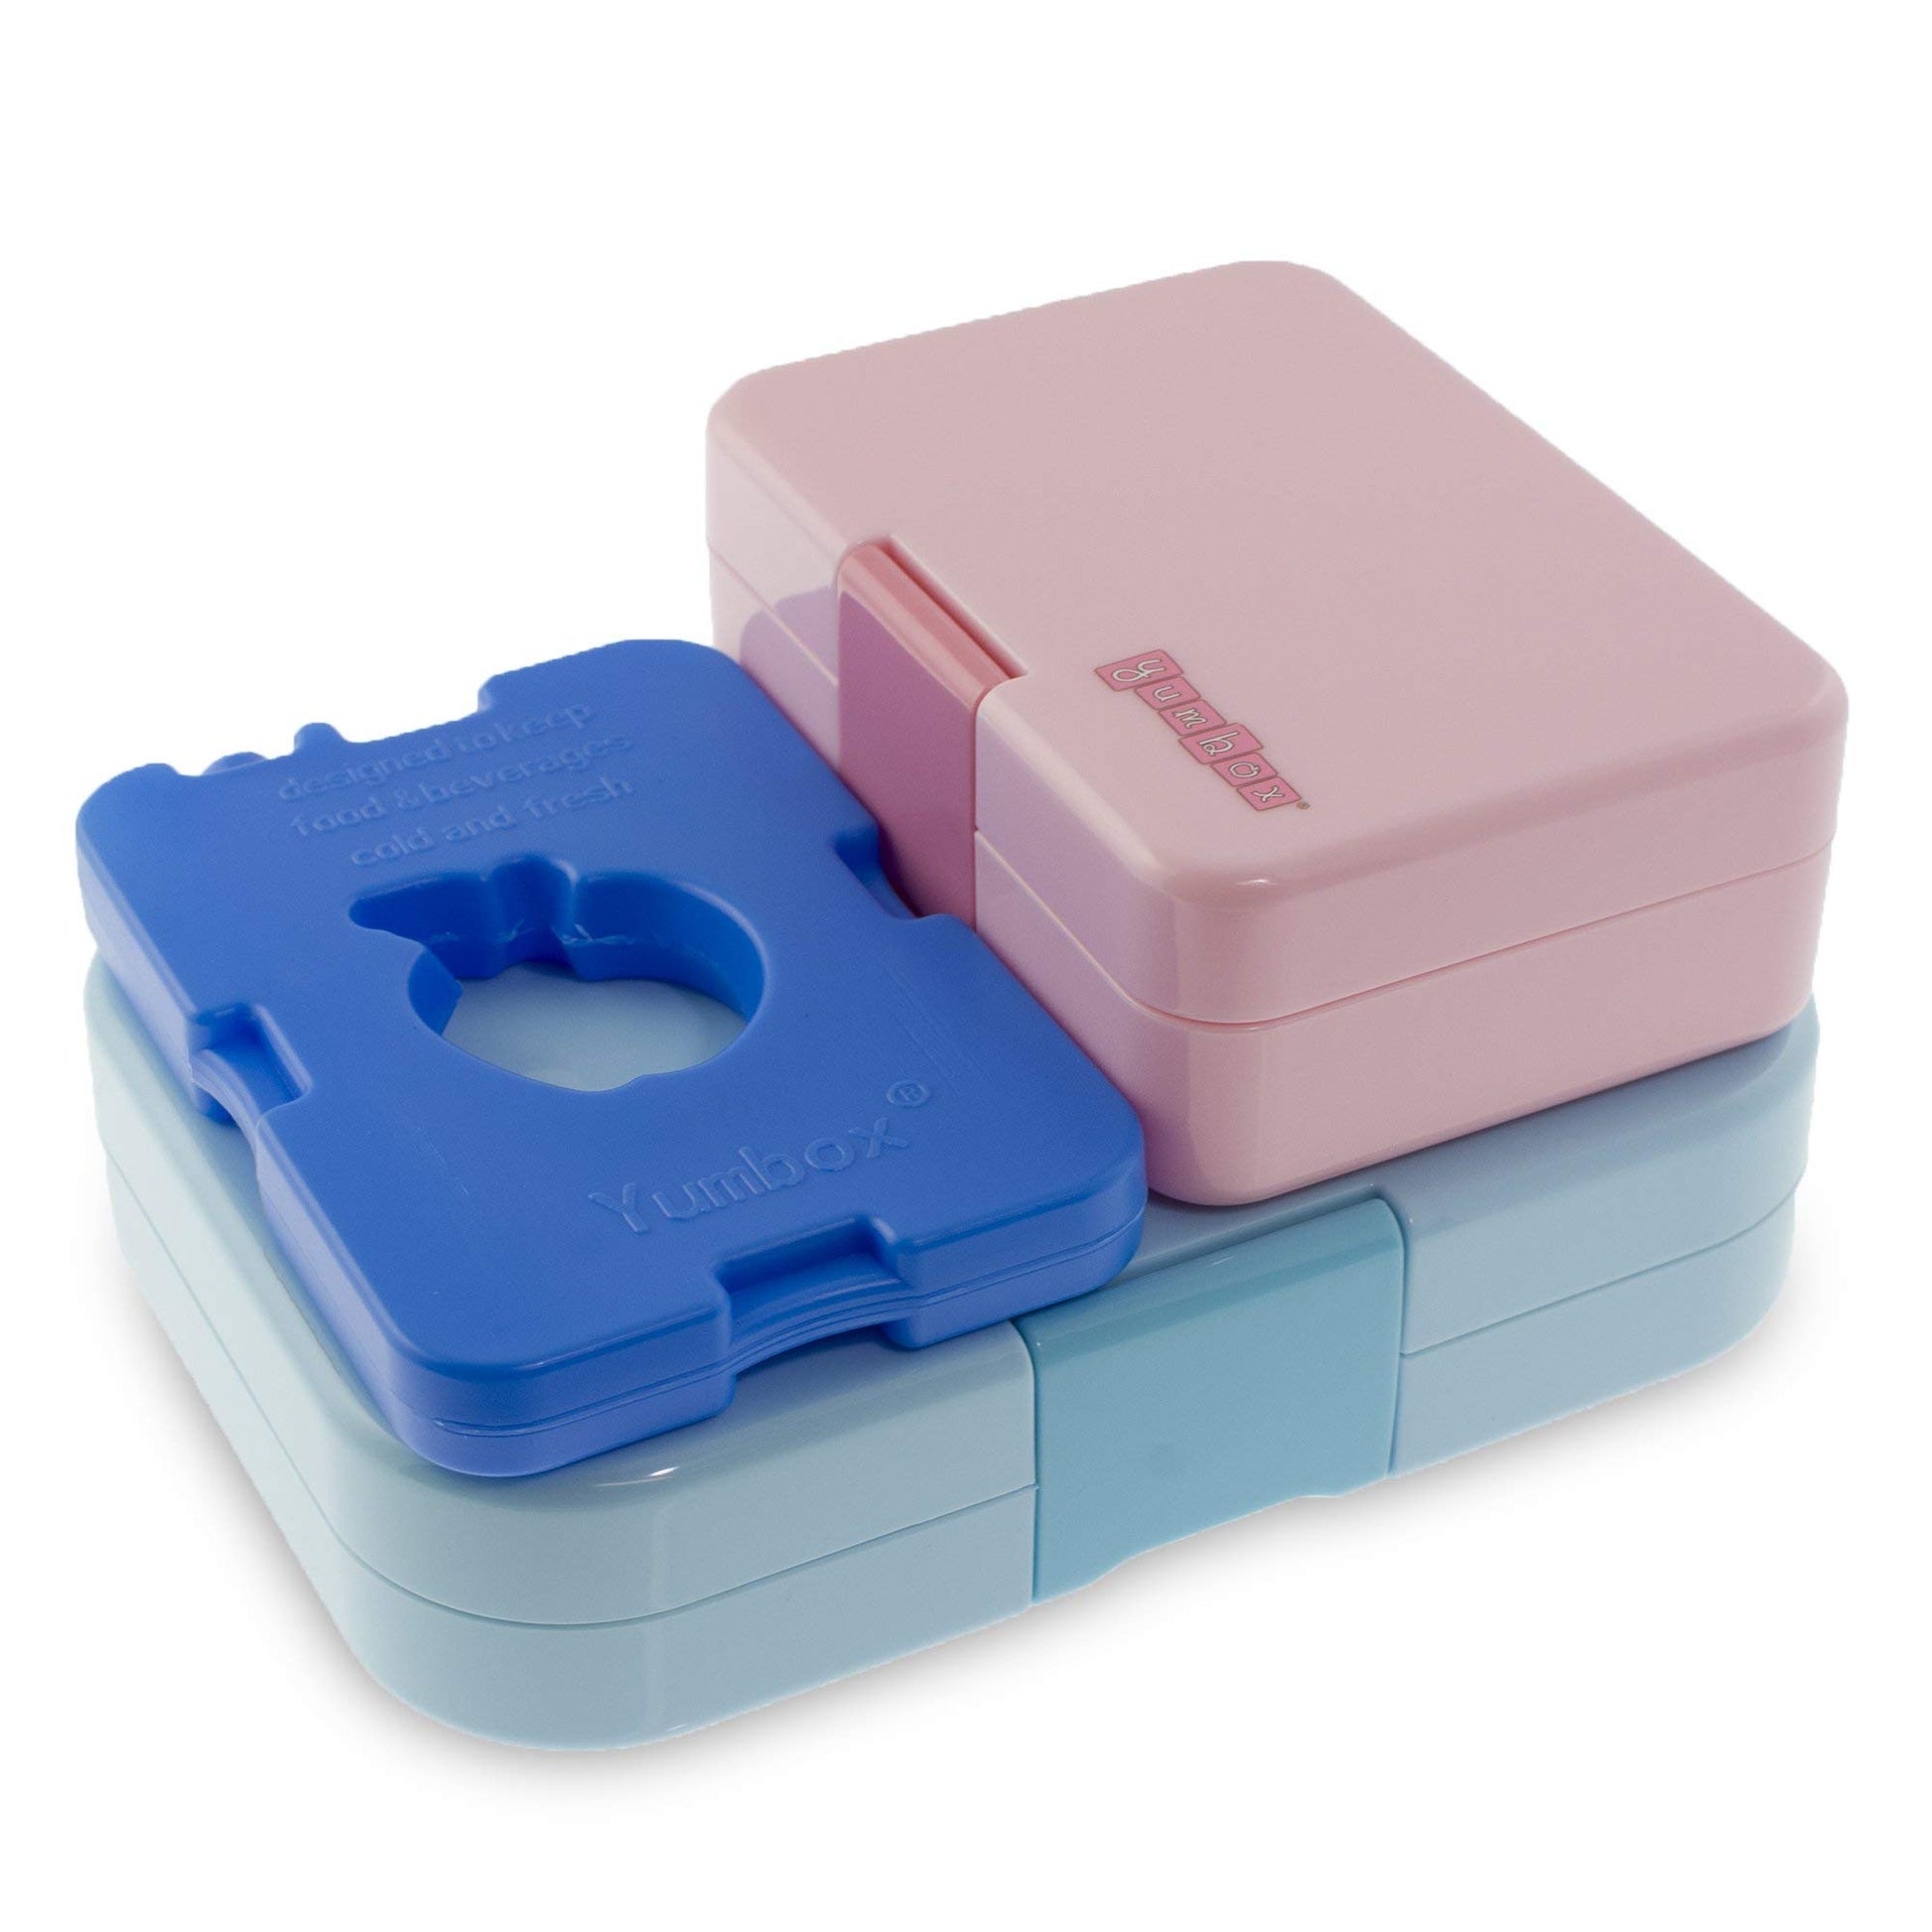 Yumbox Ice Packs (Set of 4) - Slim, Durable & Lightweight for Fresh Food - Perfect Bento Lunchbox, Coolers & More - Non-Toxic, BPA-Free - Opticdeals